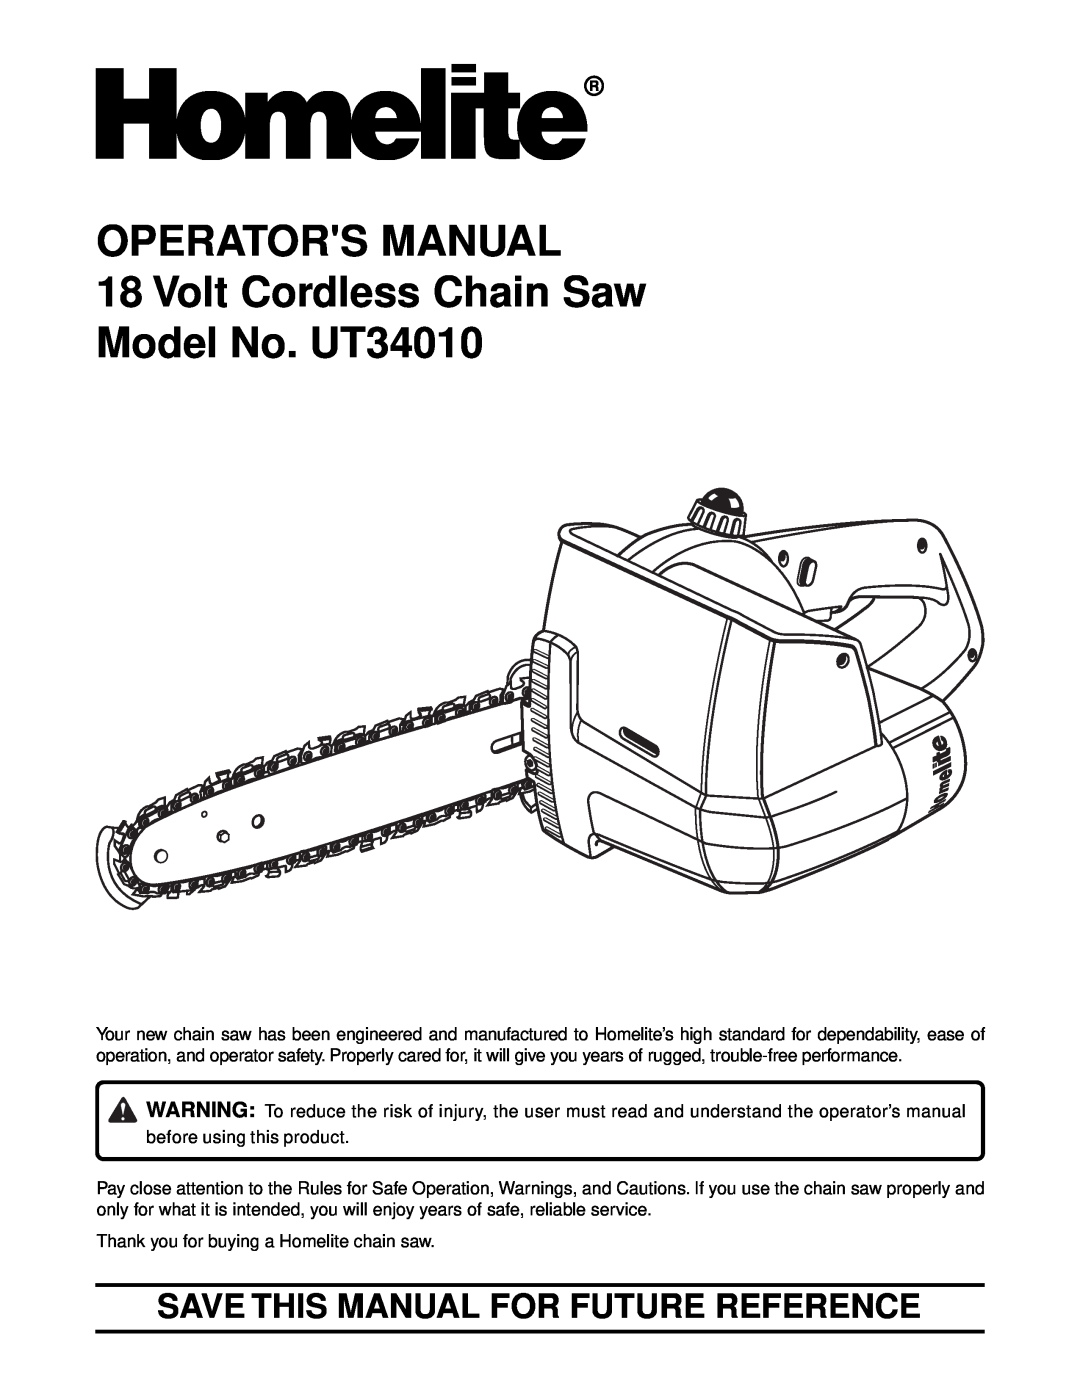 Homelite manual OPERATORS MANUAL 18 Volt Cordless Chain Saw Model No. UT34010, Save This Manual For Future Reference 